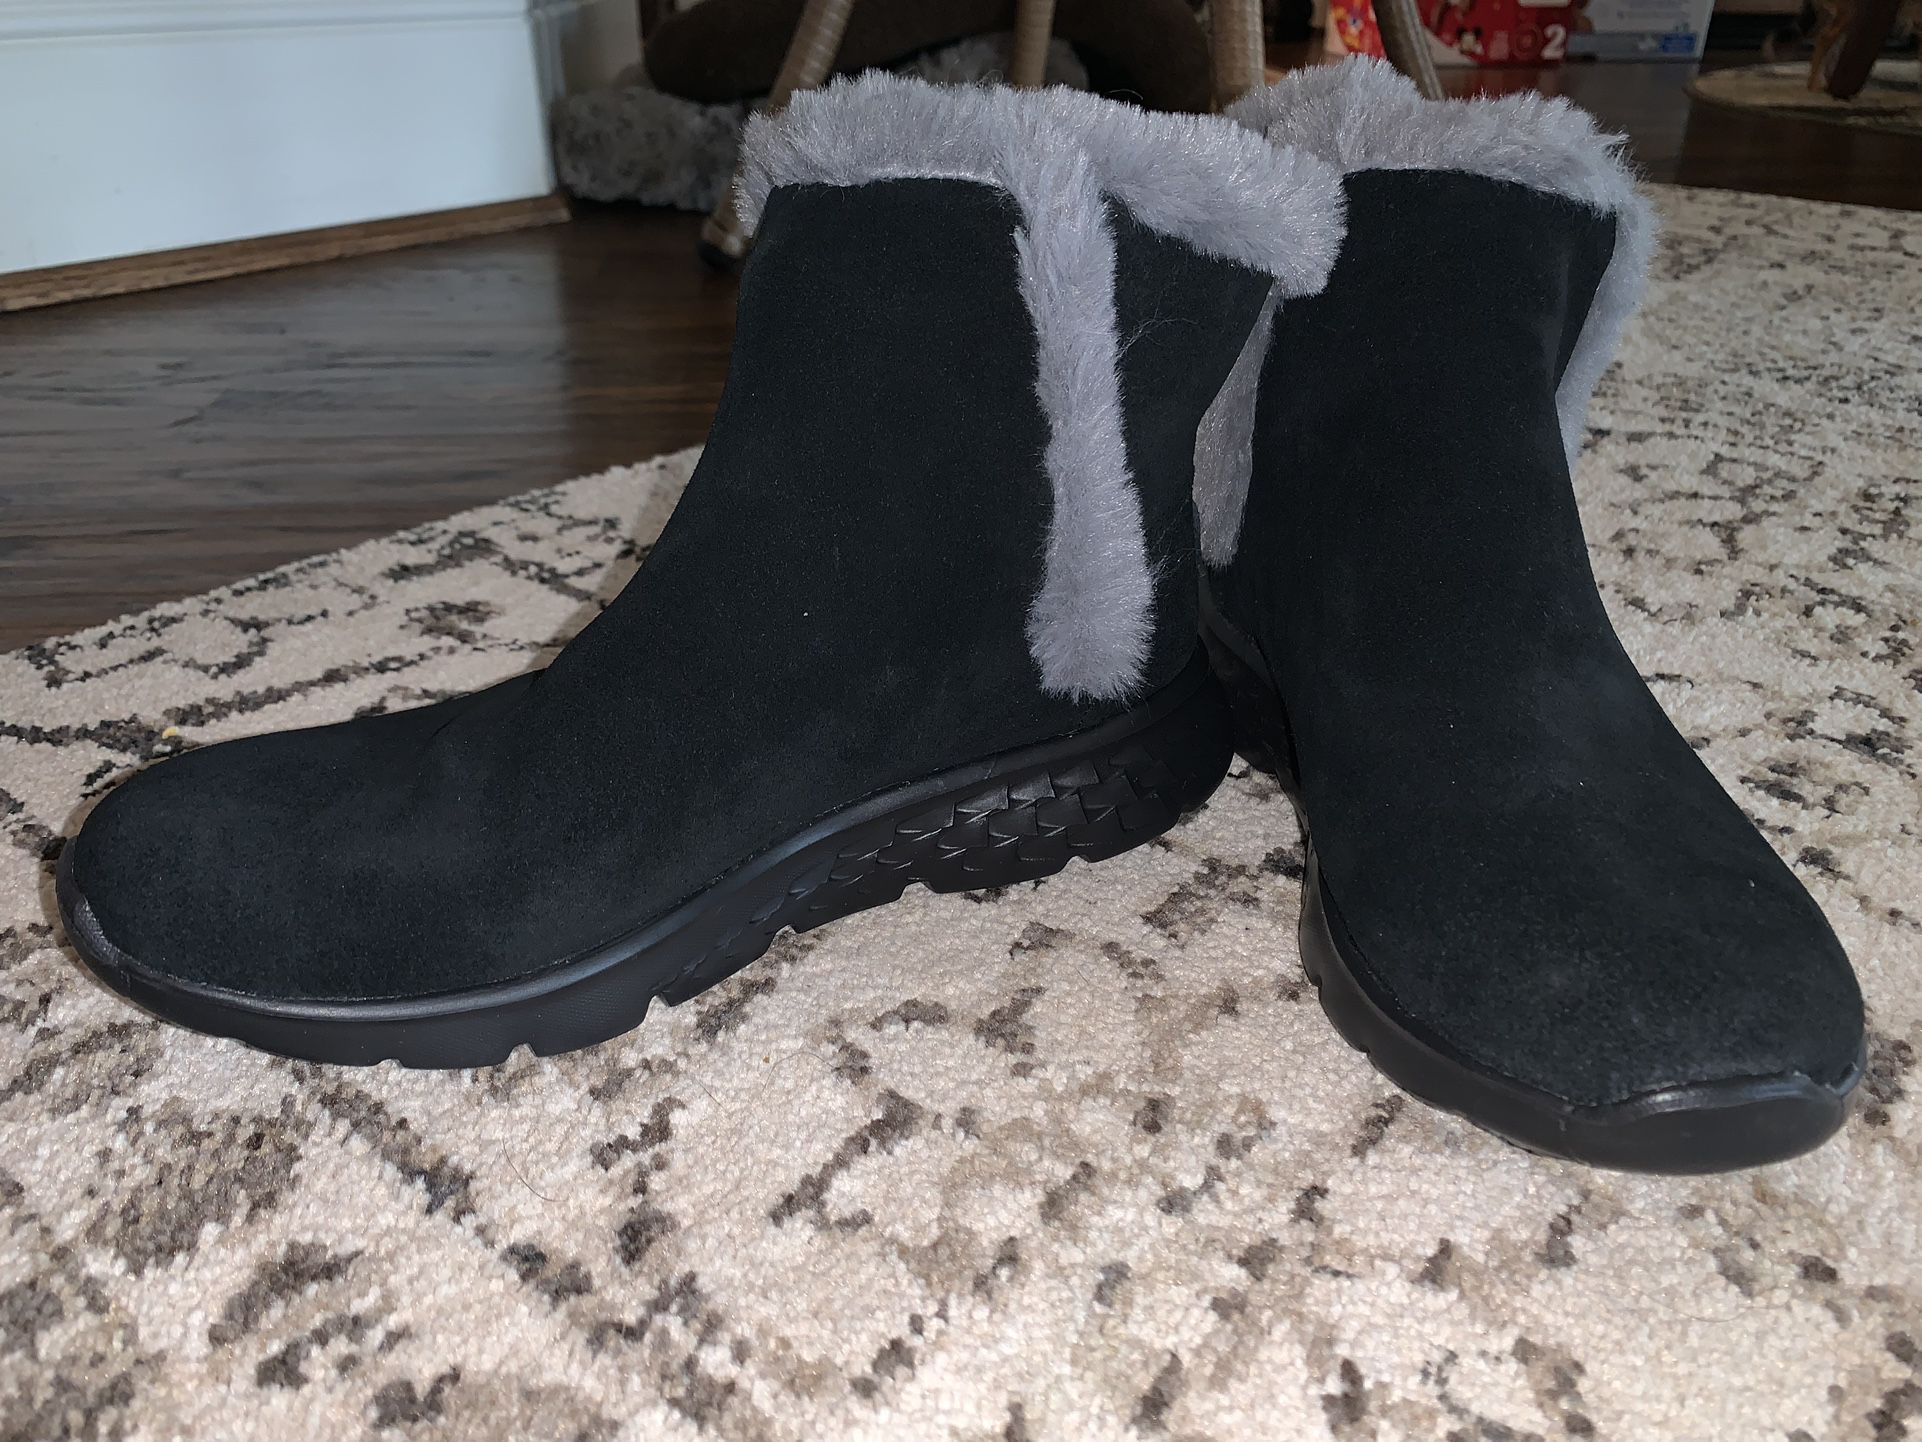 NEW Skechers women’s on the go, winter boot fur-lined size 6